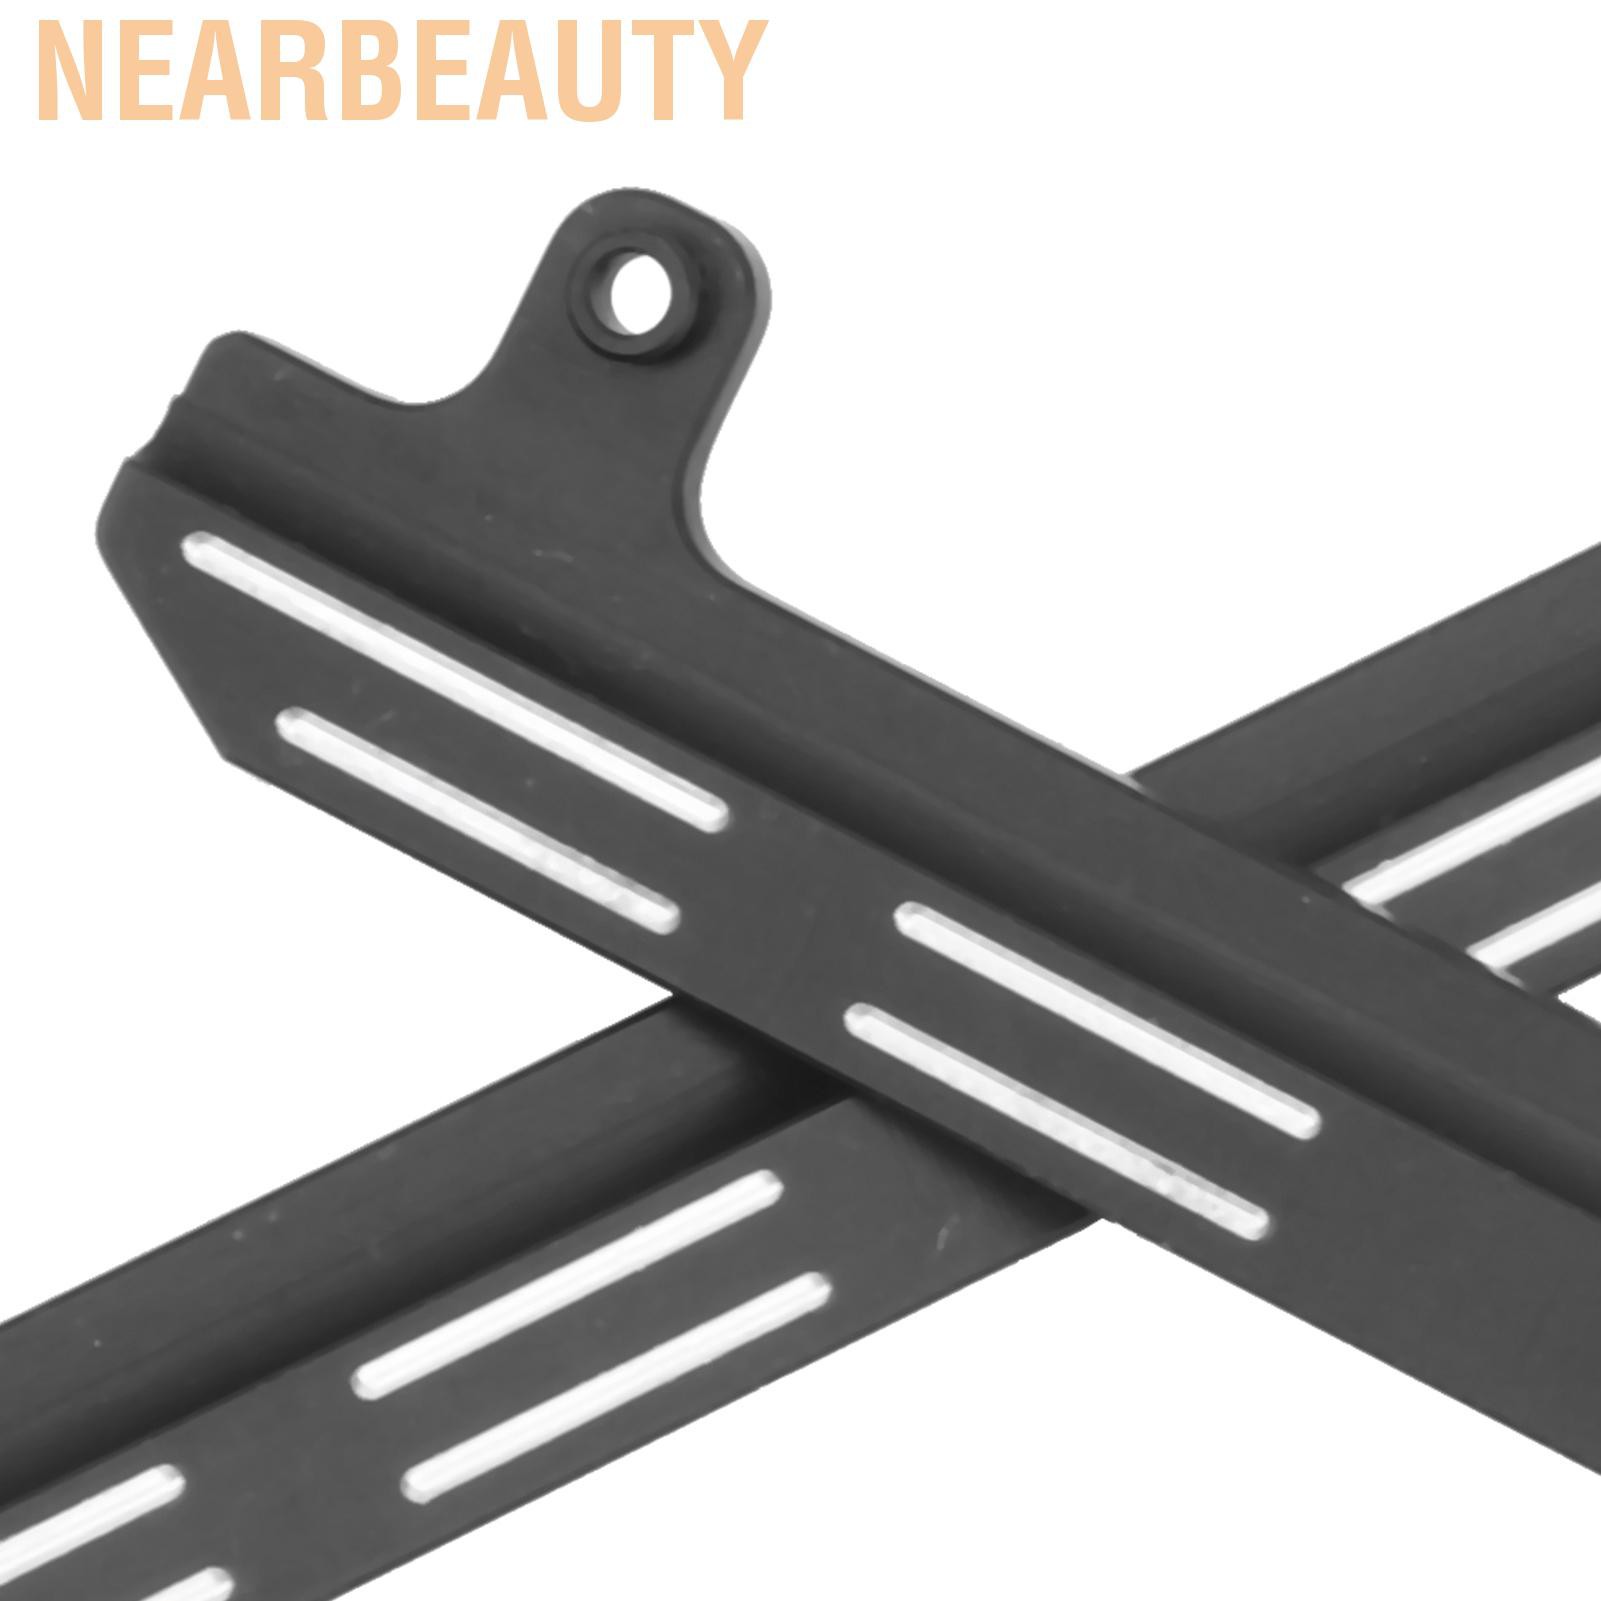 Nearbeauty RC Side Pedal Aluminum Alloy Plate Replacement for XIAOMI JIMNY 1/16 Car